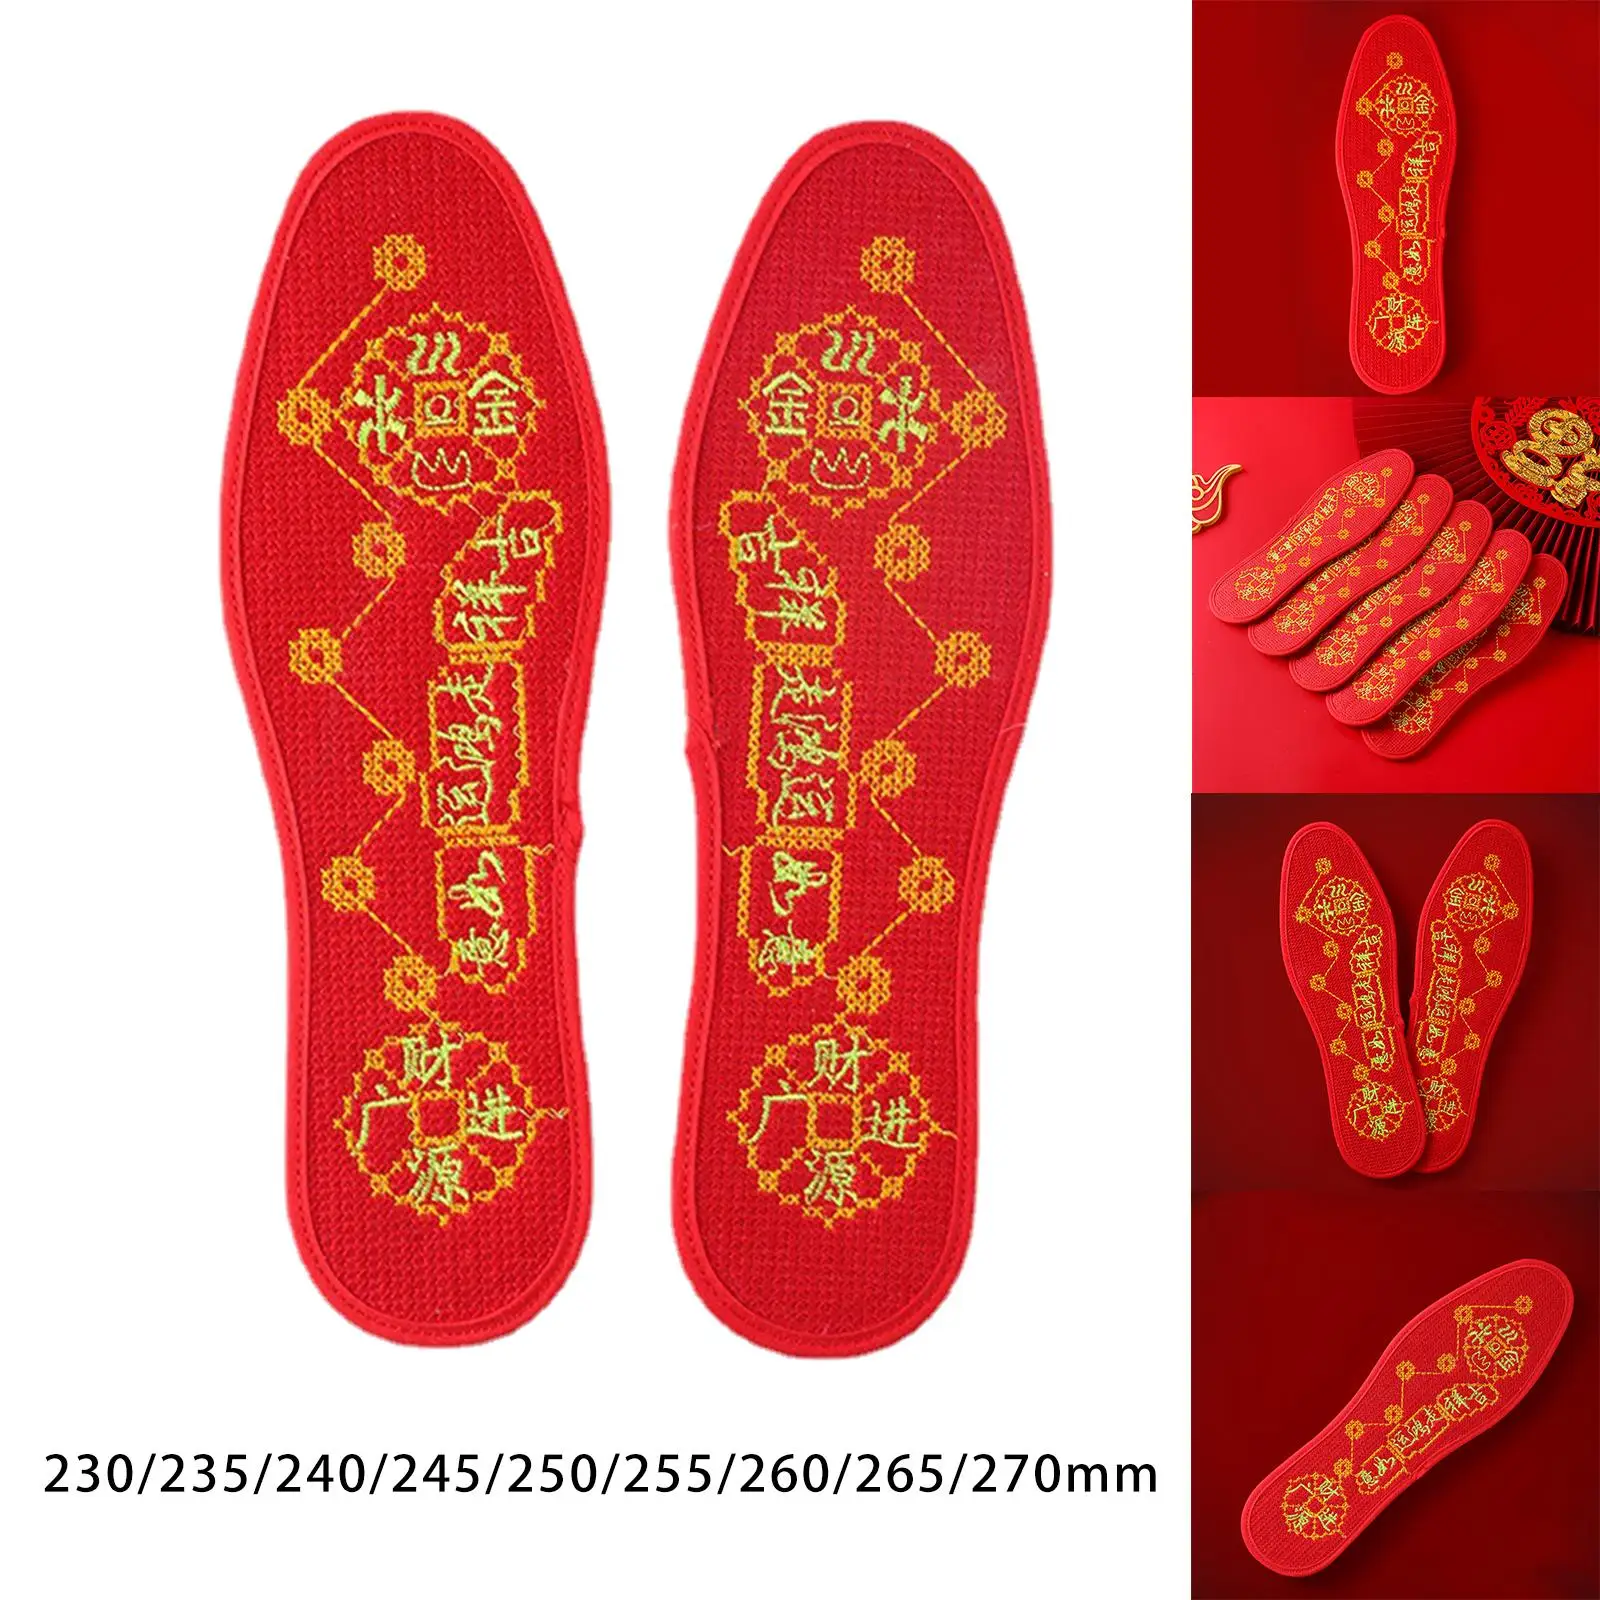 Feng Shui Seven Coins Insoles Wear Resistant Boot Insoles Sweat Absorbent Feng Shui Insoles Shoes Insert Red for Unisex Sports